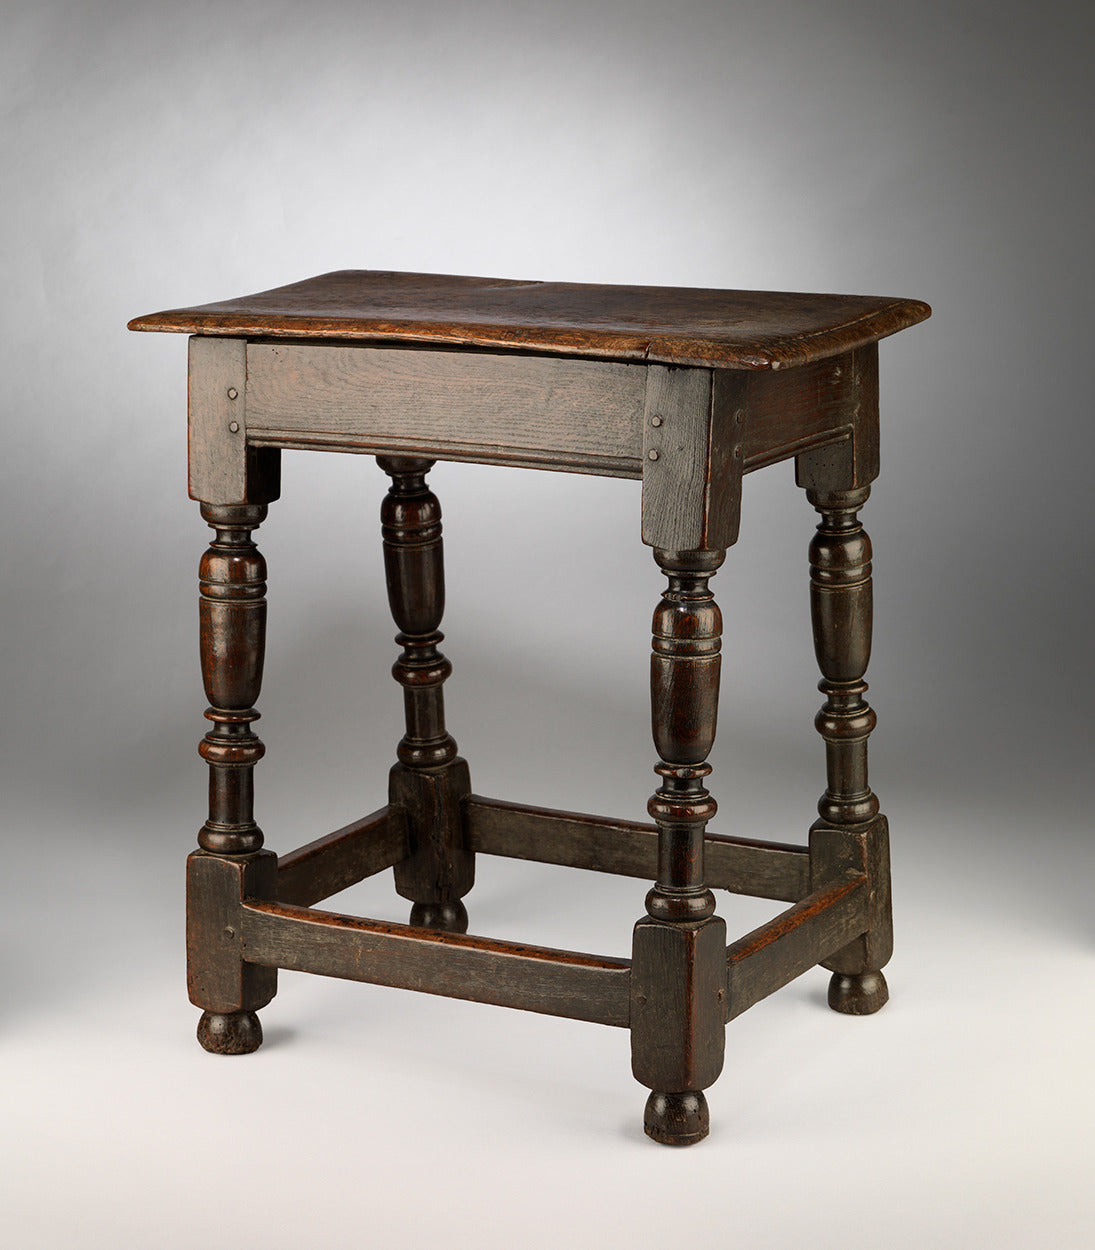 Classic William and Mary Period Joint Stool